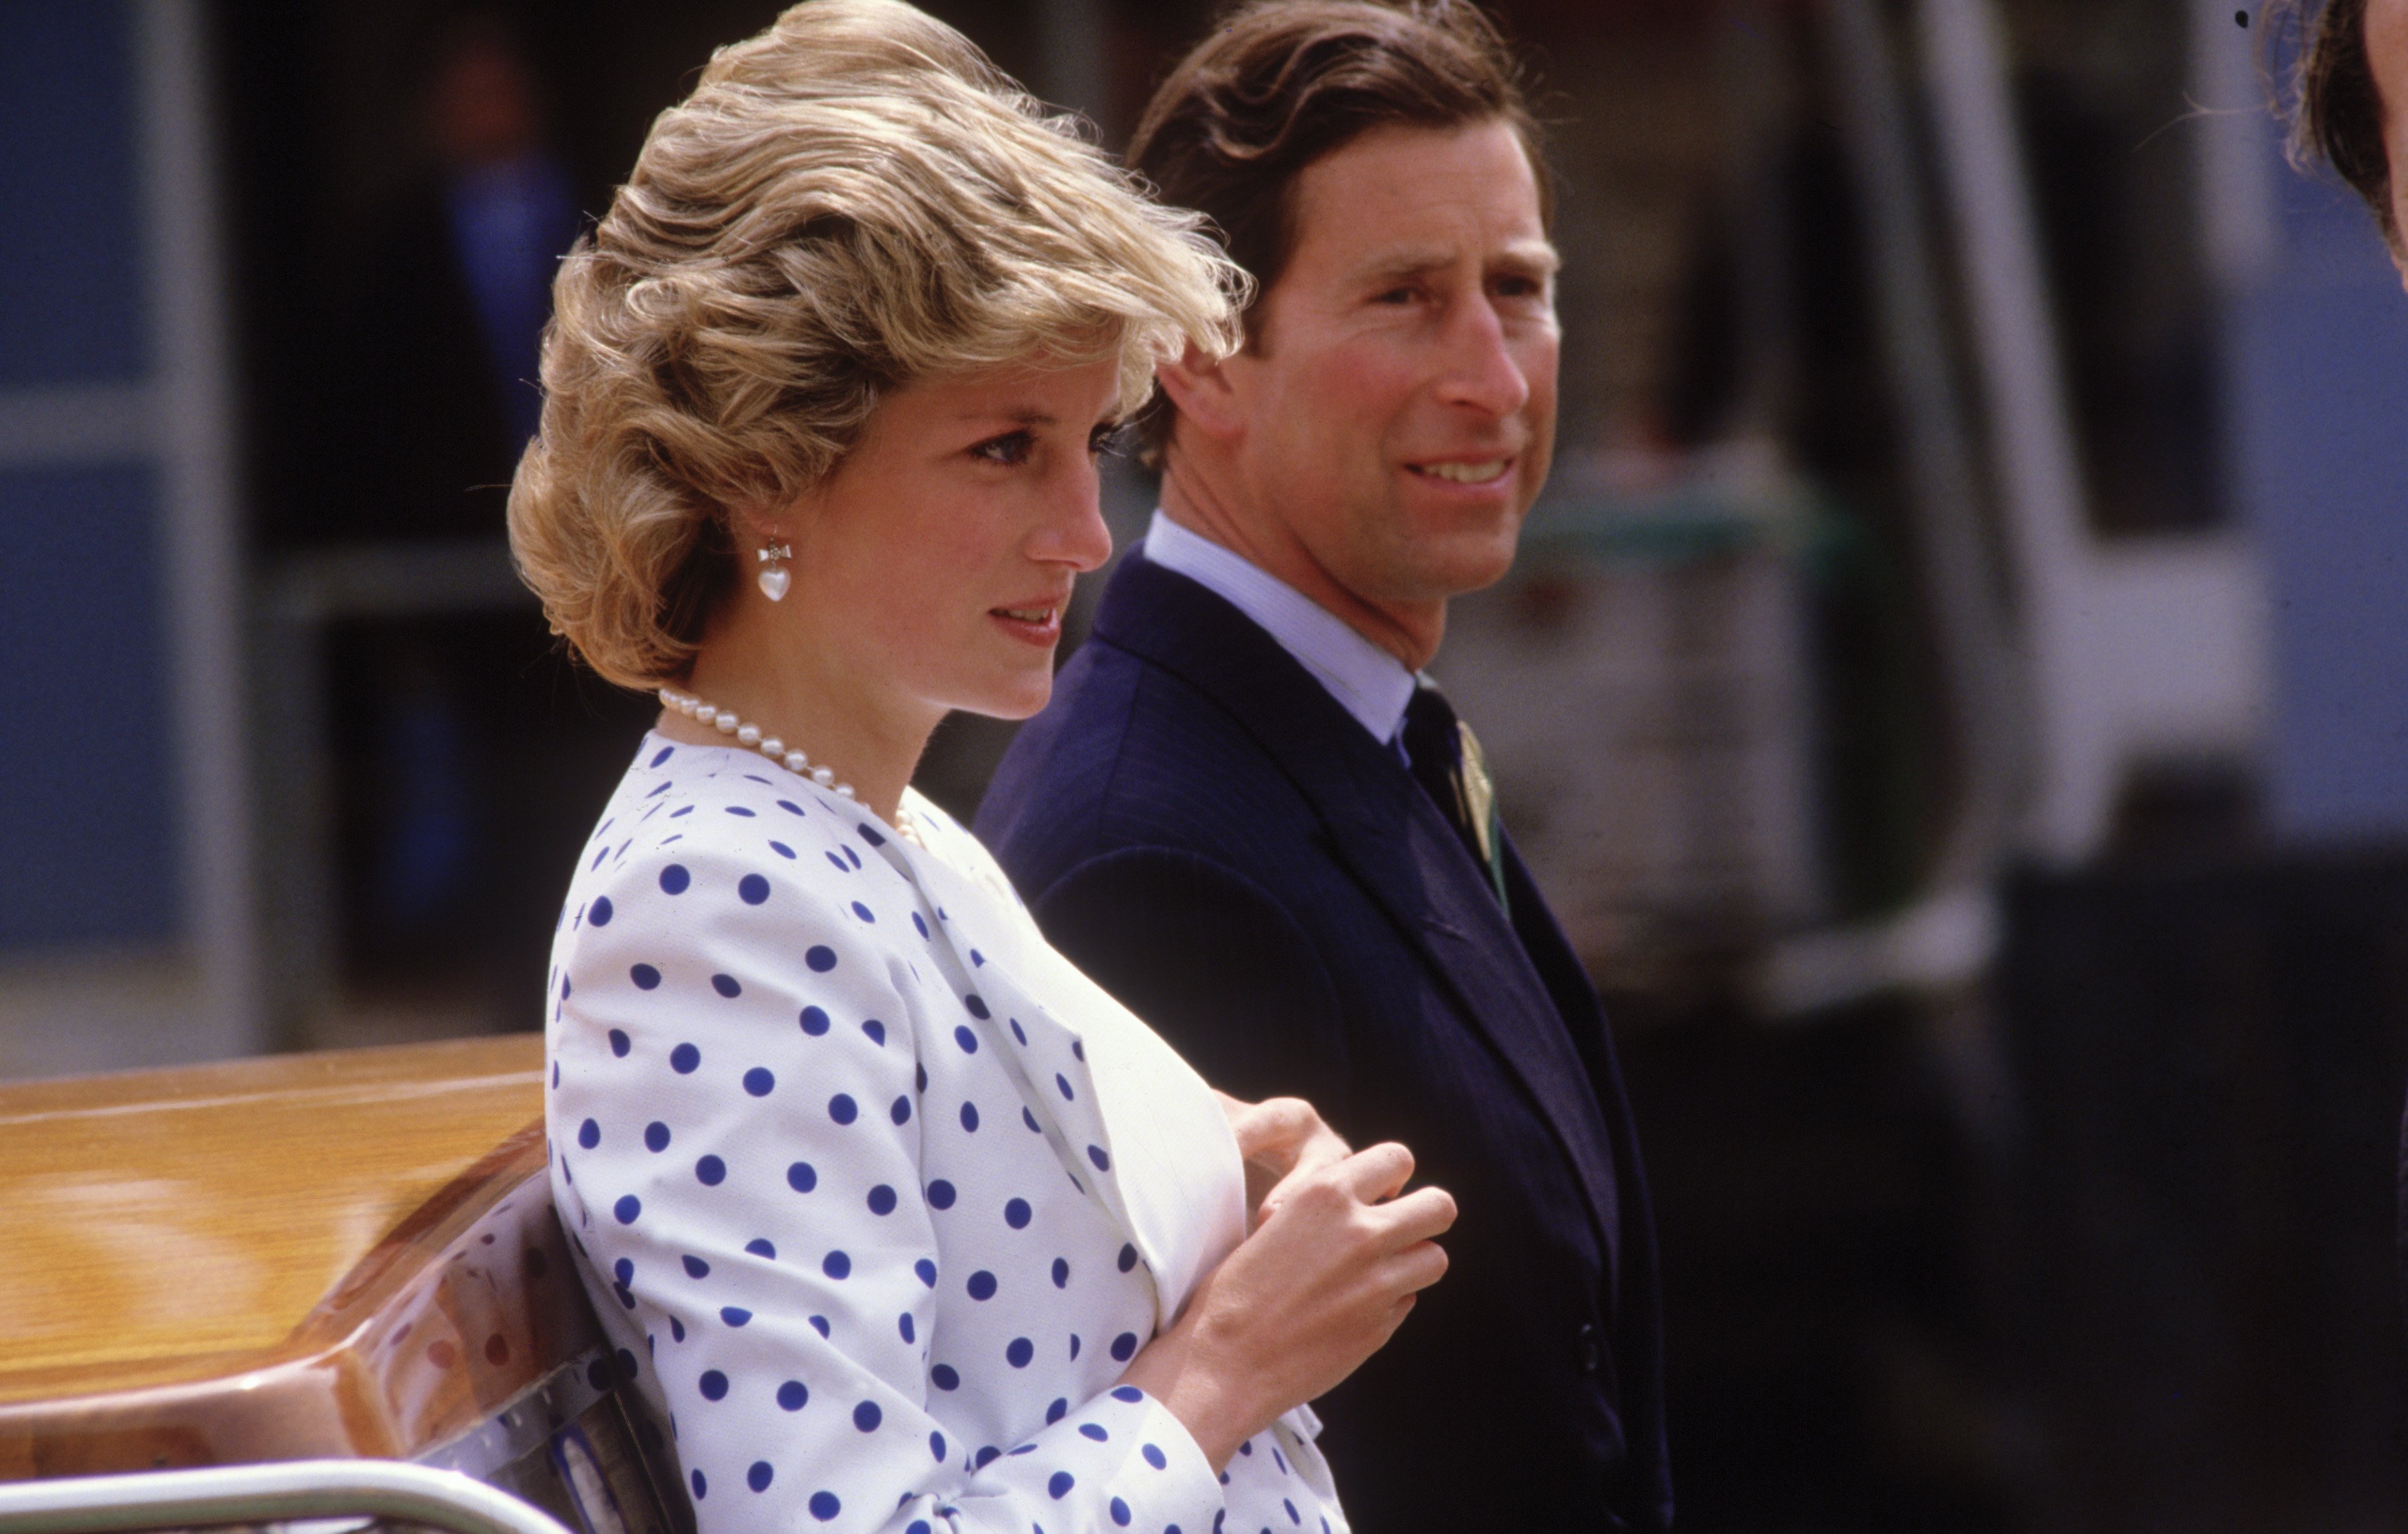 Diana Princess of Wales and Prince Charles travel by motor boat along the Grand Canal in Venice, Italy on May 4, 1985 | Photo: GettyImages